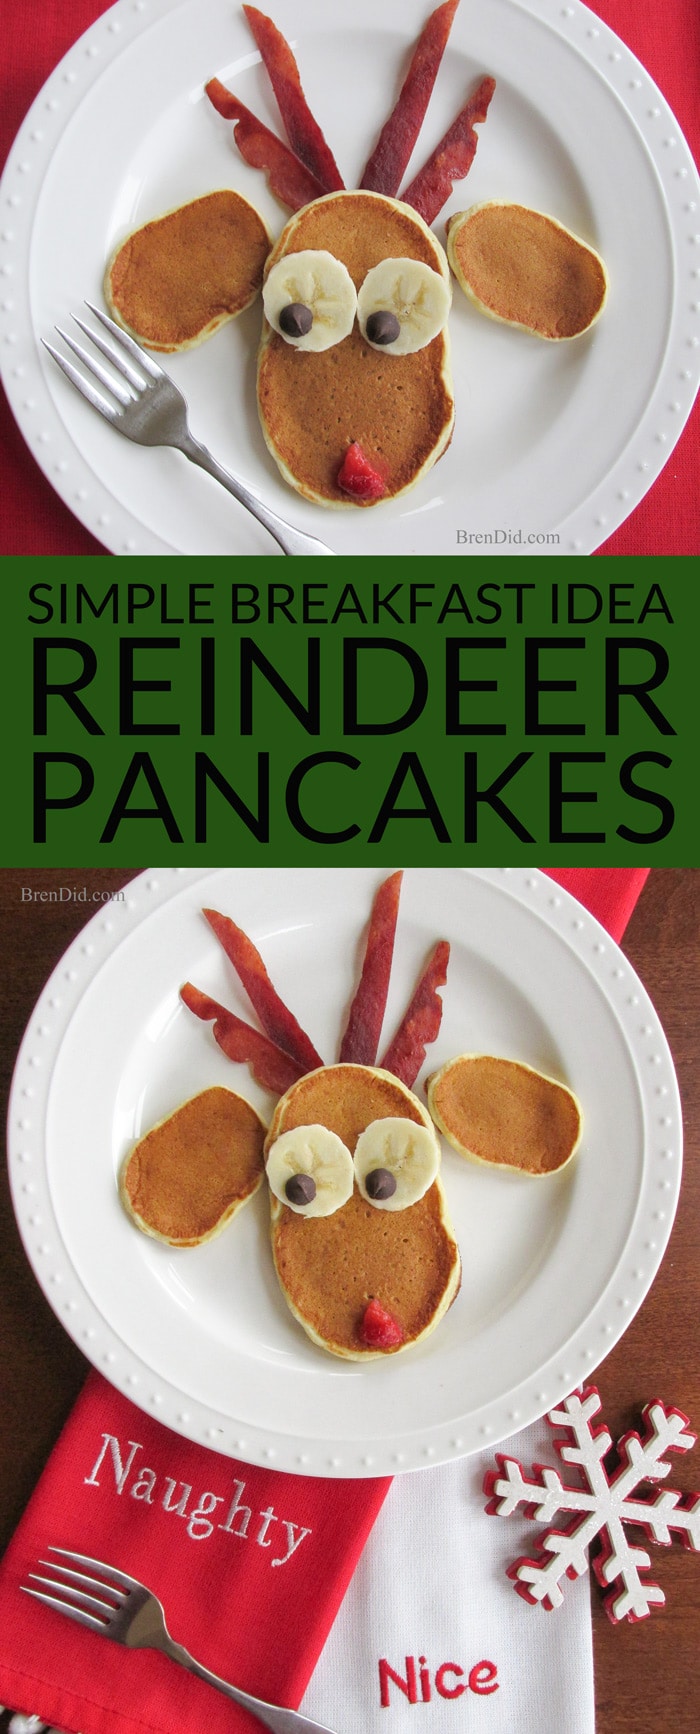 Simple Breakfast Recipe: Reindeer Pancakes for Christmas Breakfast- This Christmas breakfast idea is easy to make and looks adorable! Santa’s elves line up for a delicious breakfast of fluffy pancakes before a tough day at the toy factory. Healthy breakfast idea.